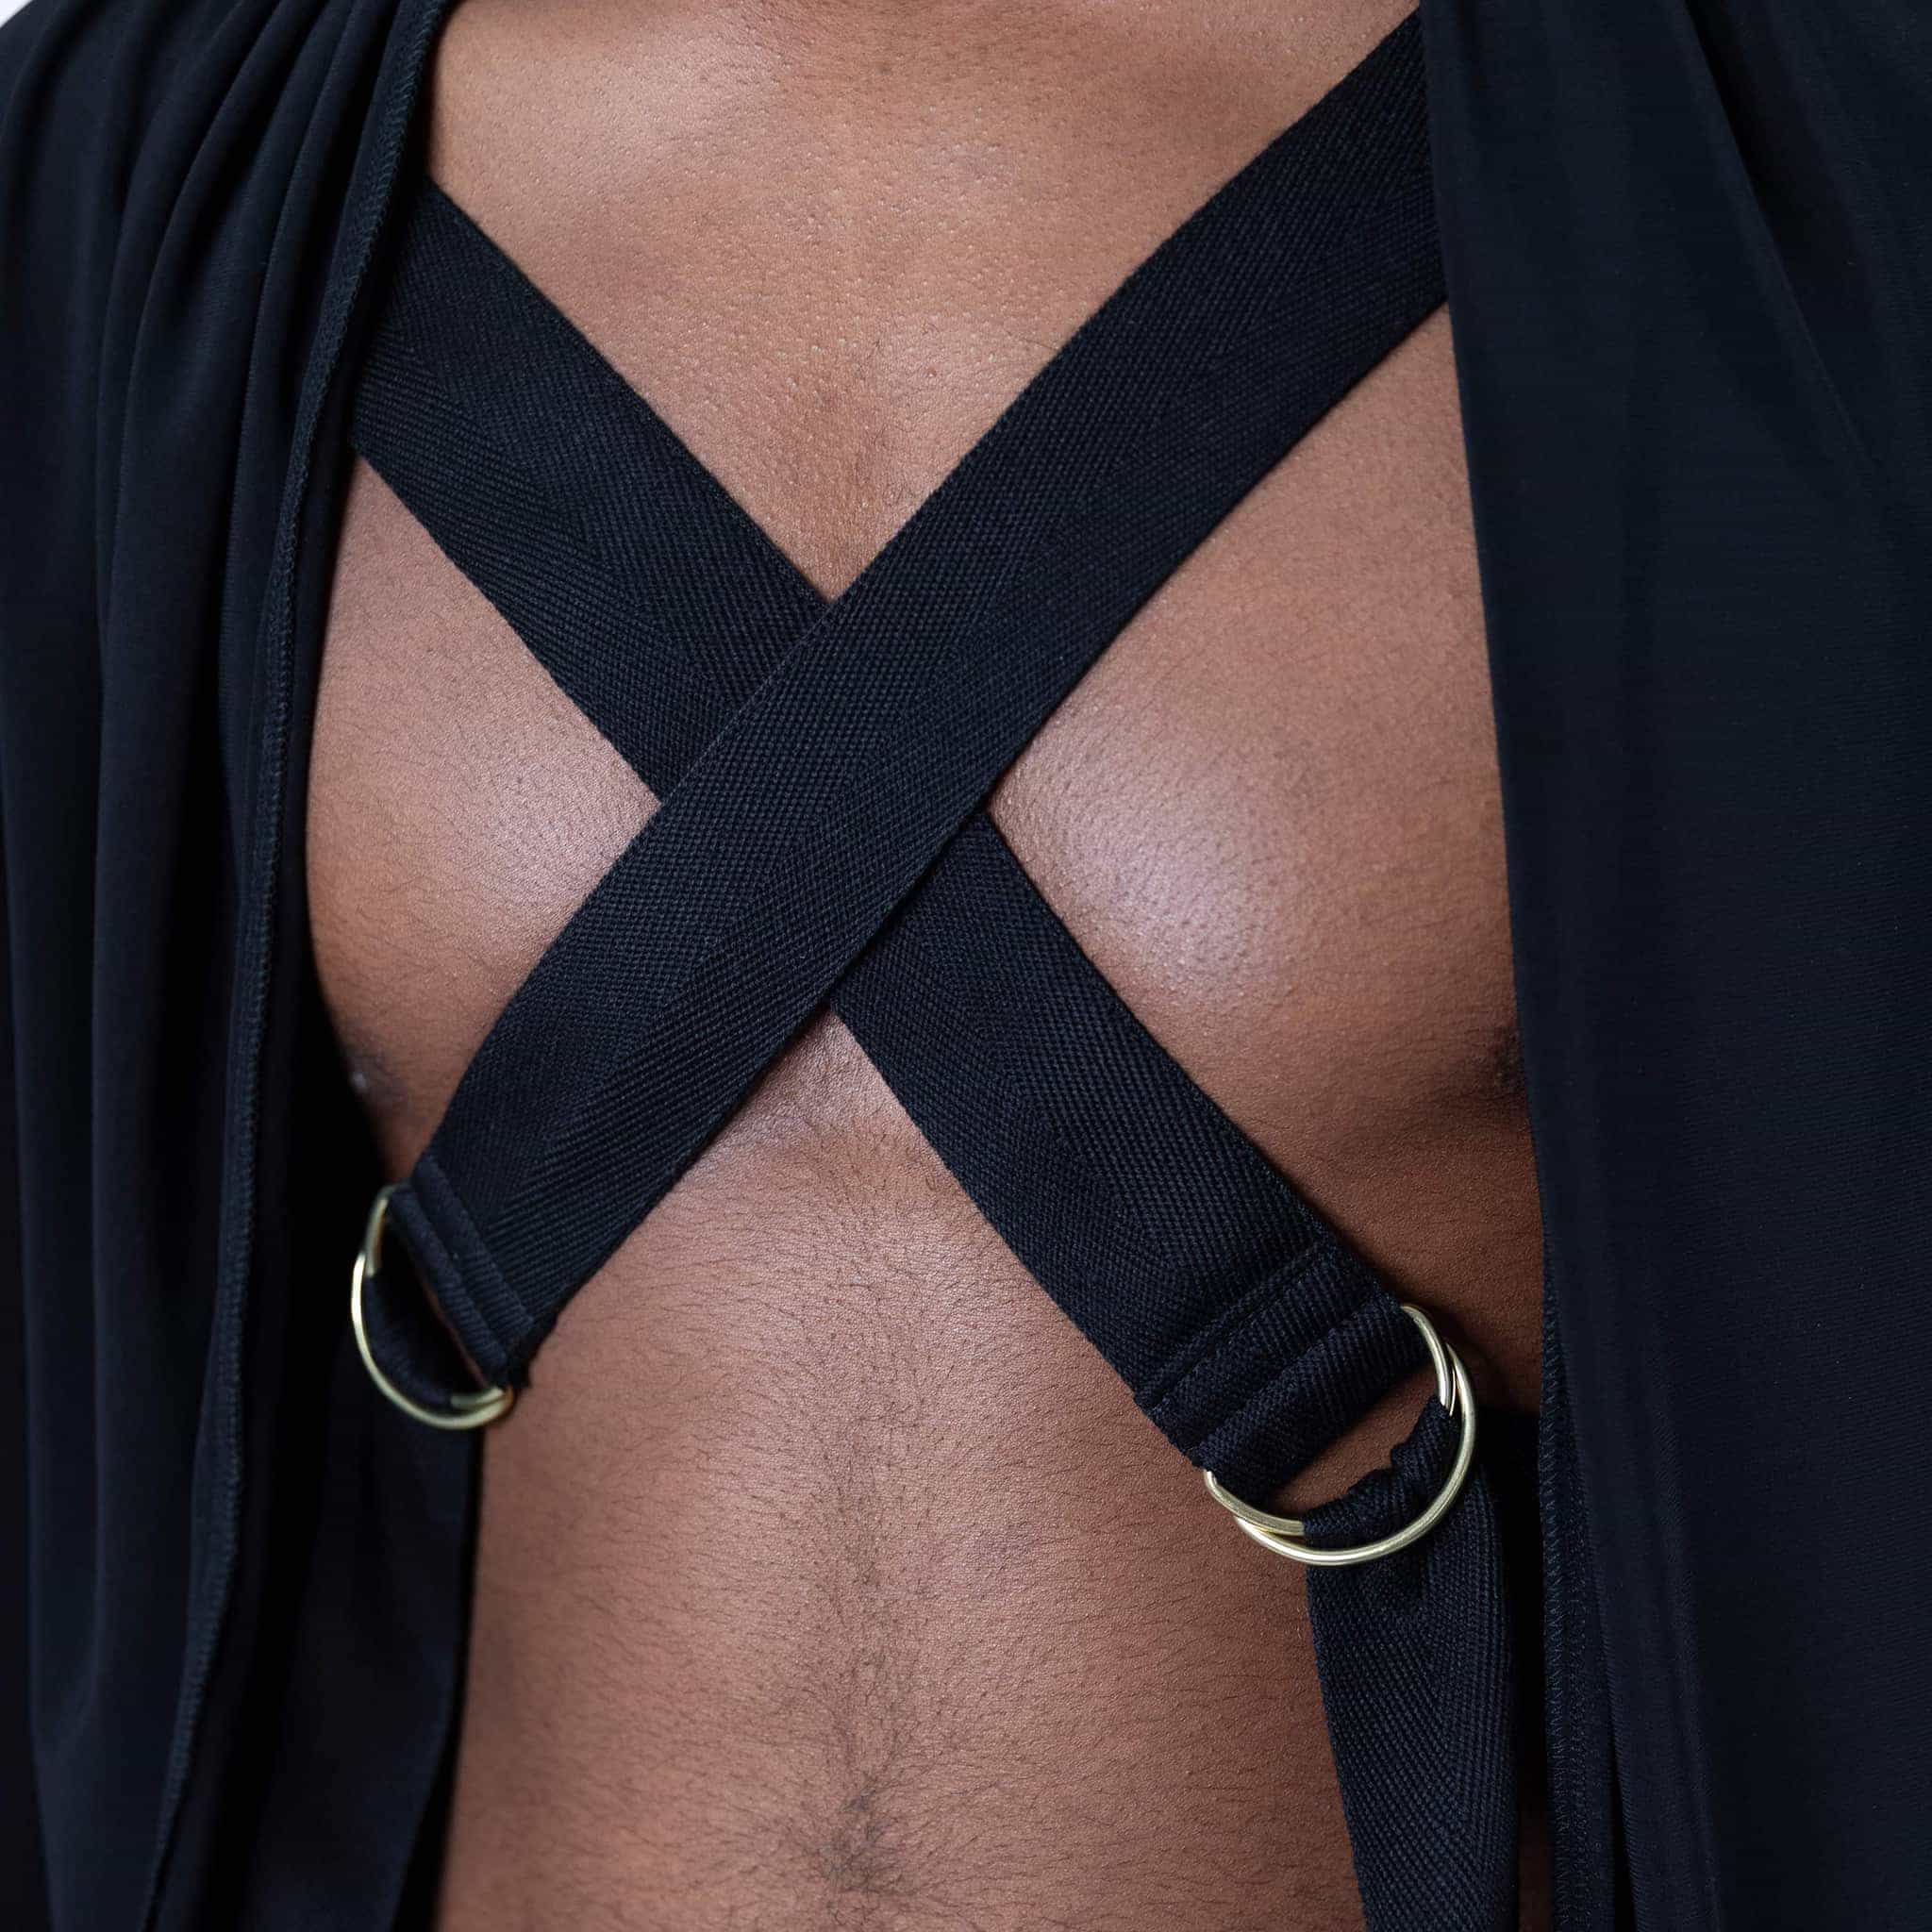   ZERØ London - Close up, black long sleeved zero waste cardigan robe with harness and black trousers designed & made in London